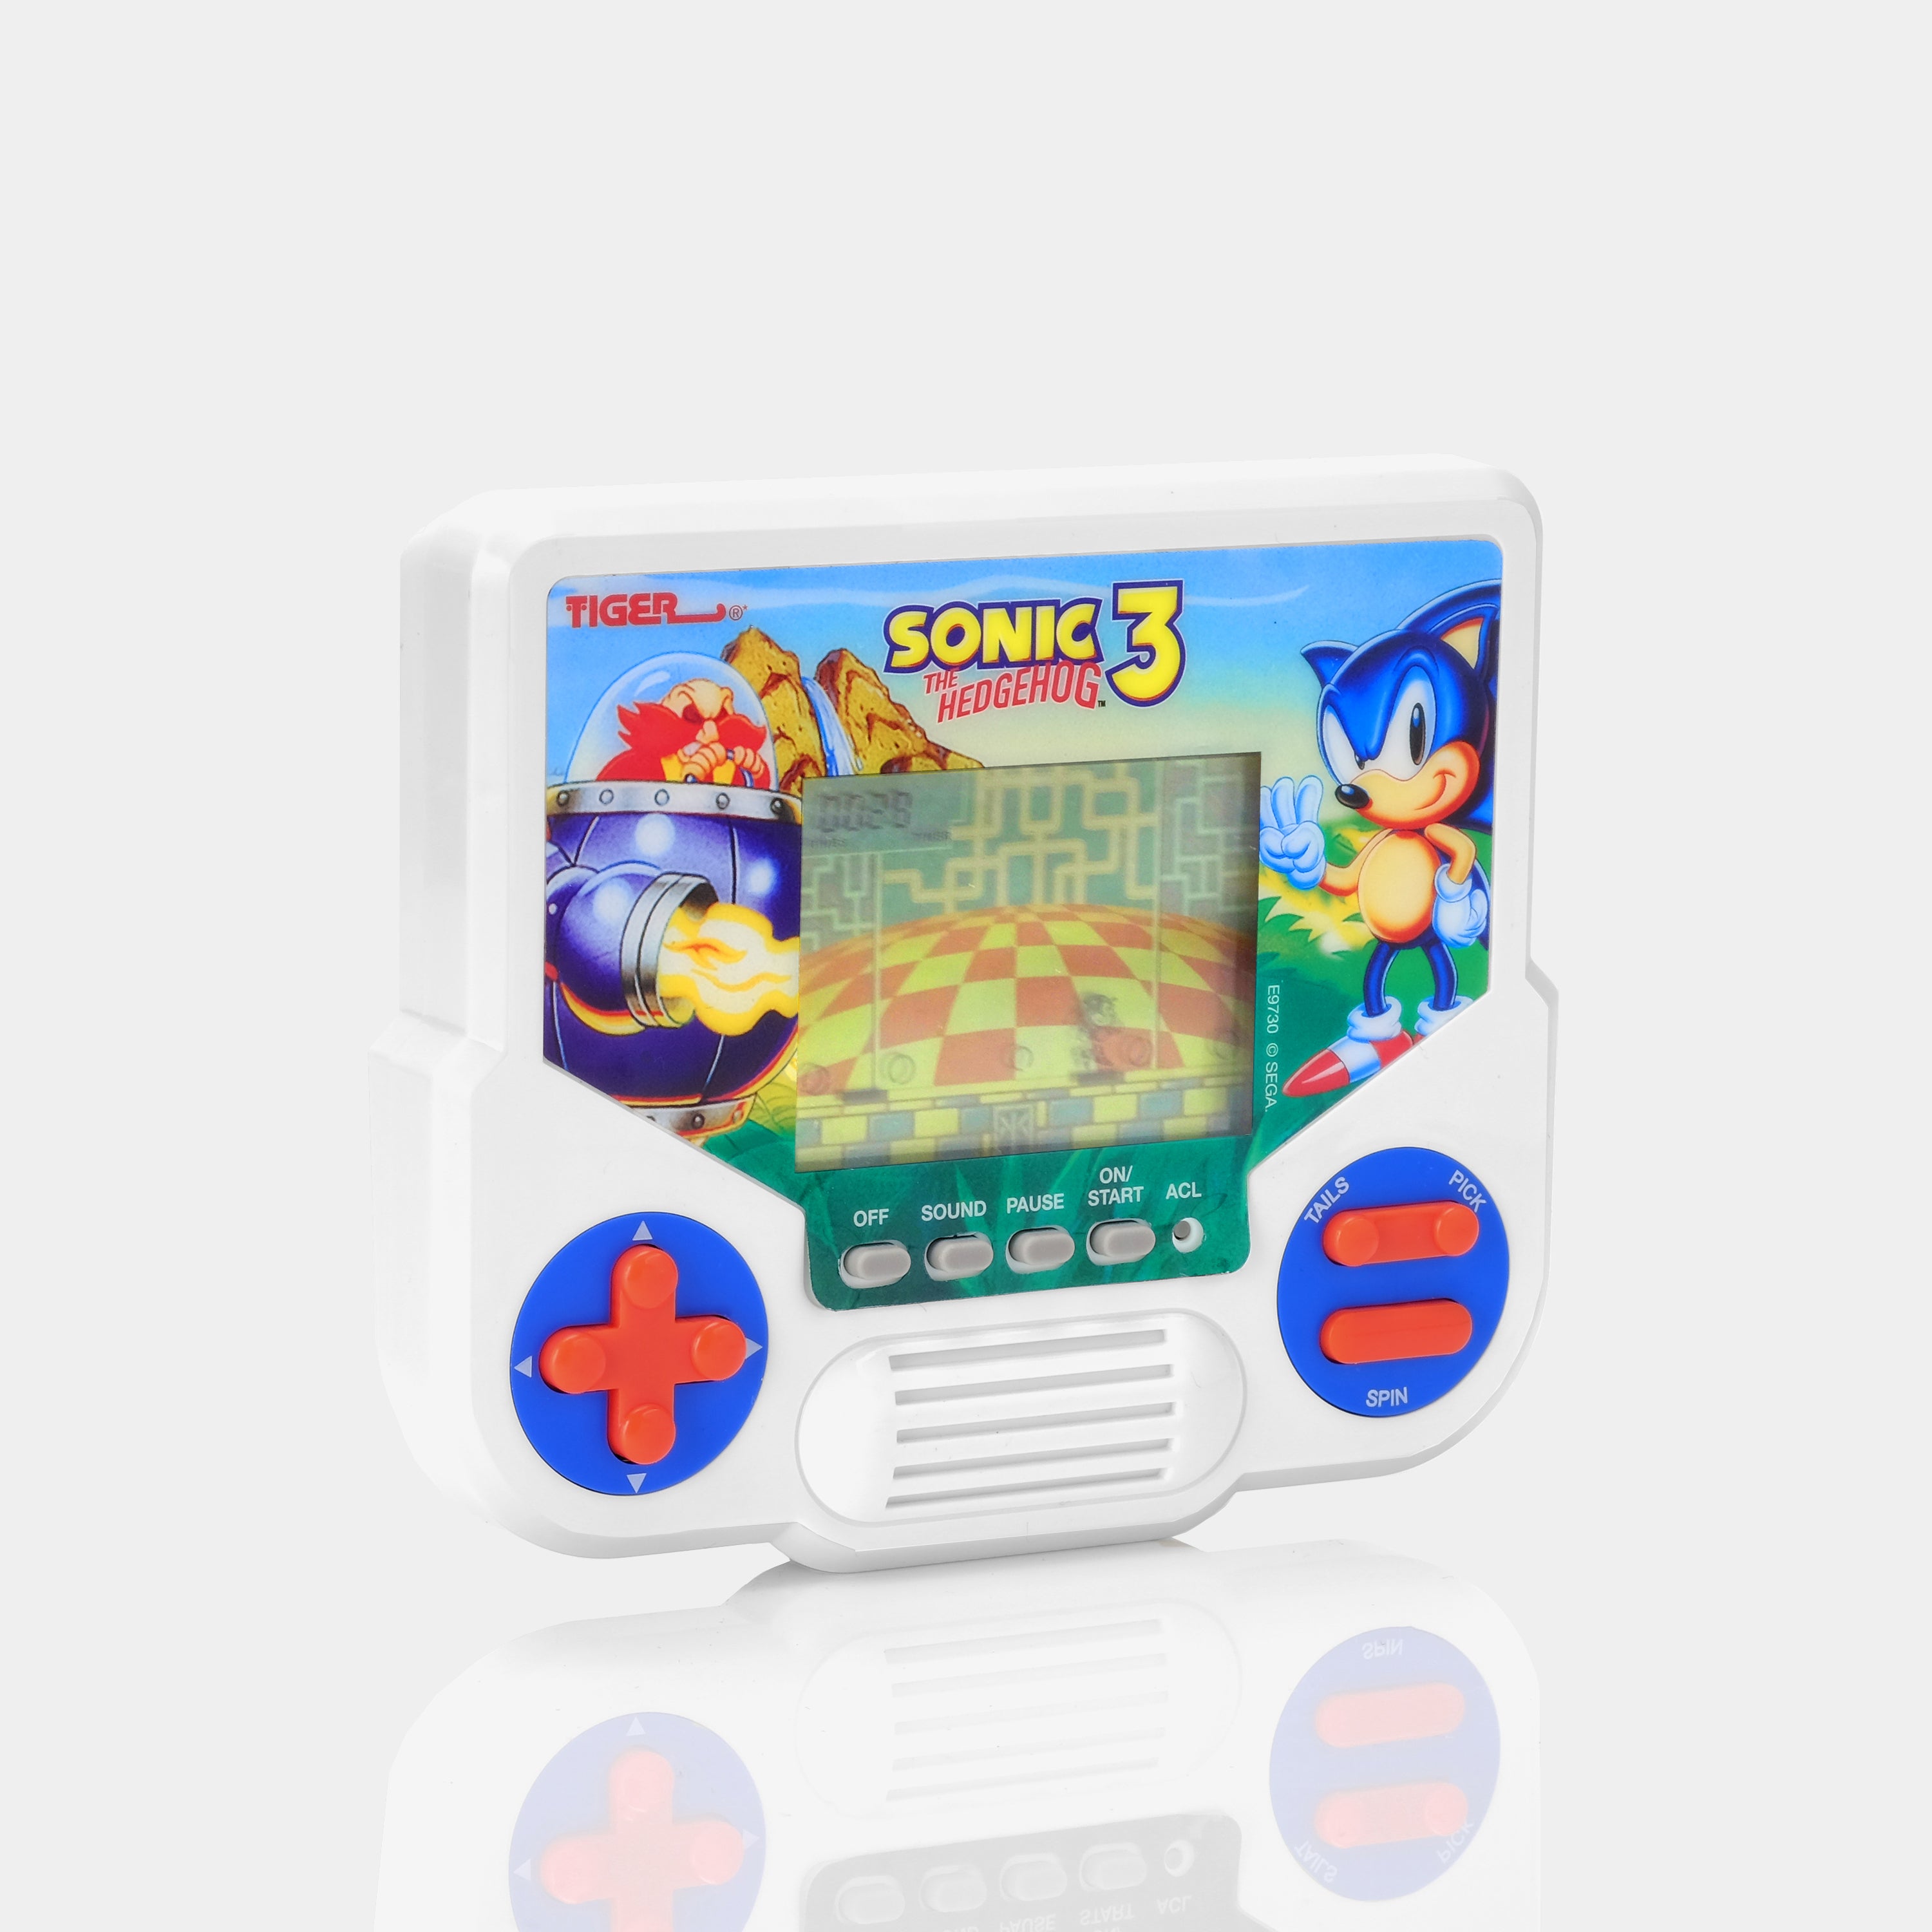 Tiger Sonic the Hedgehog 3 Handheld LCD Video Game System